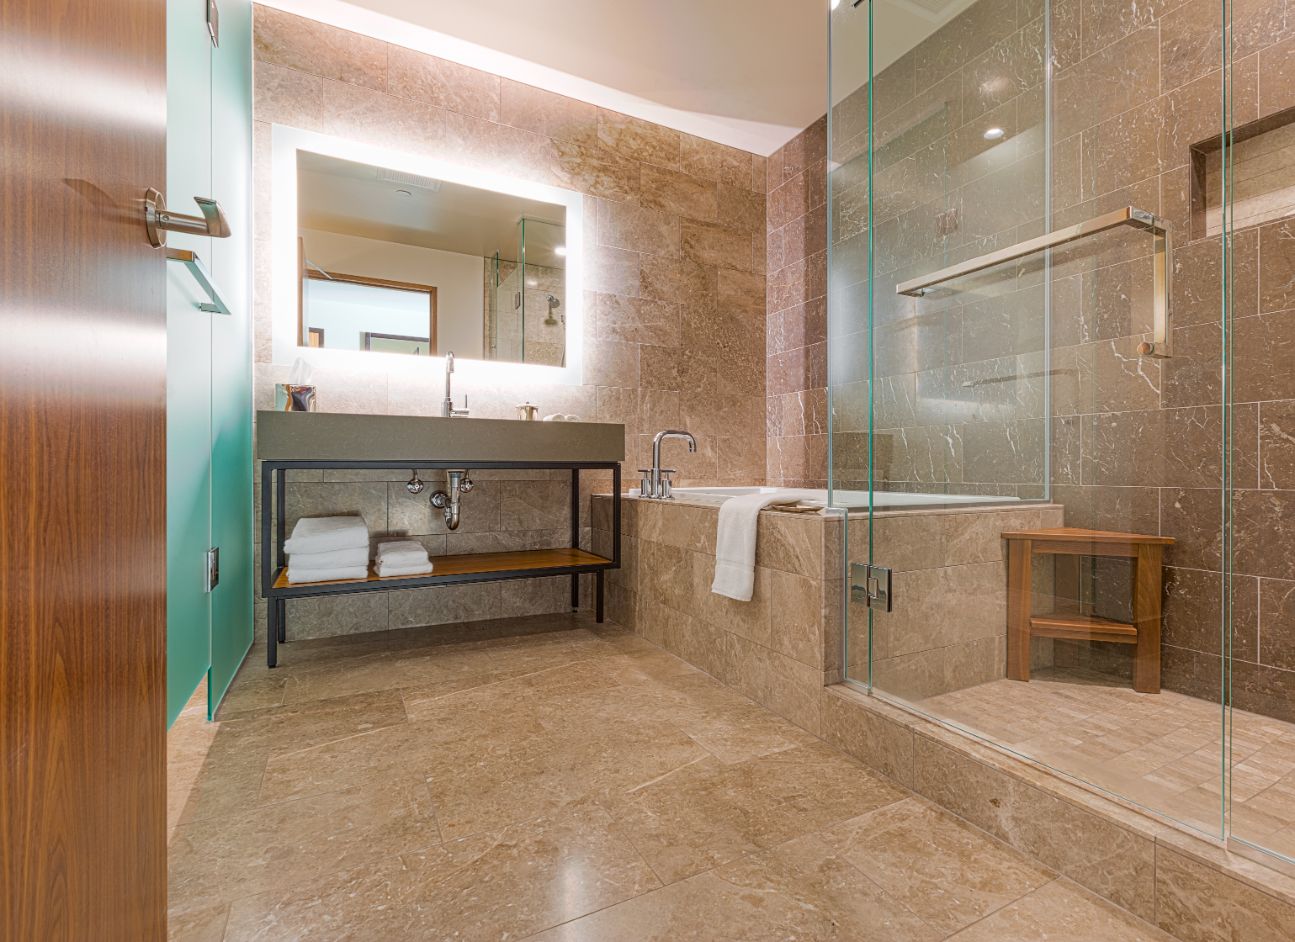 Picture of a modern bathroom featuring a backlit mirror, marble tiles, and warm colors.